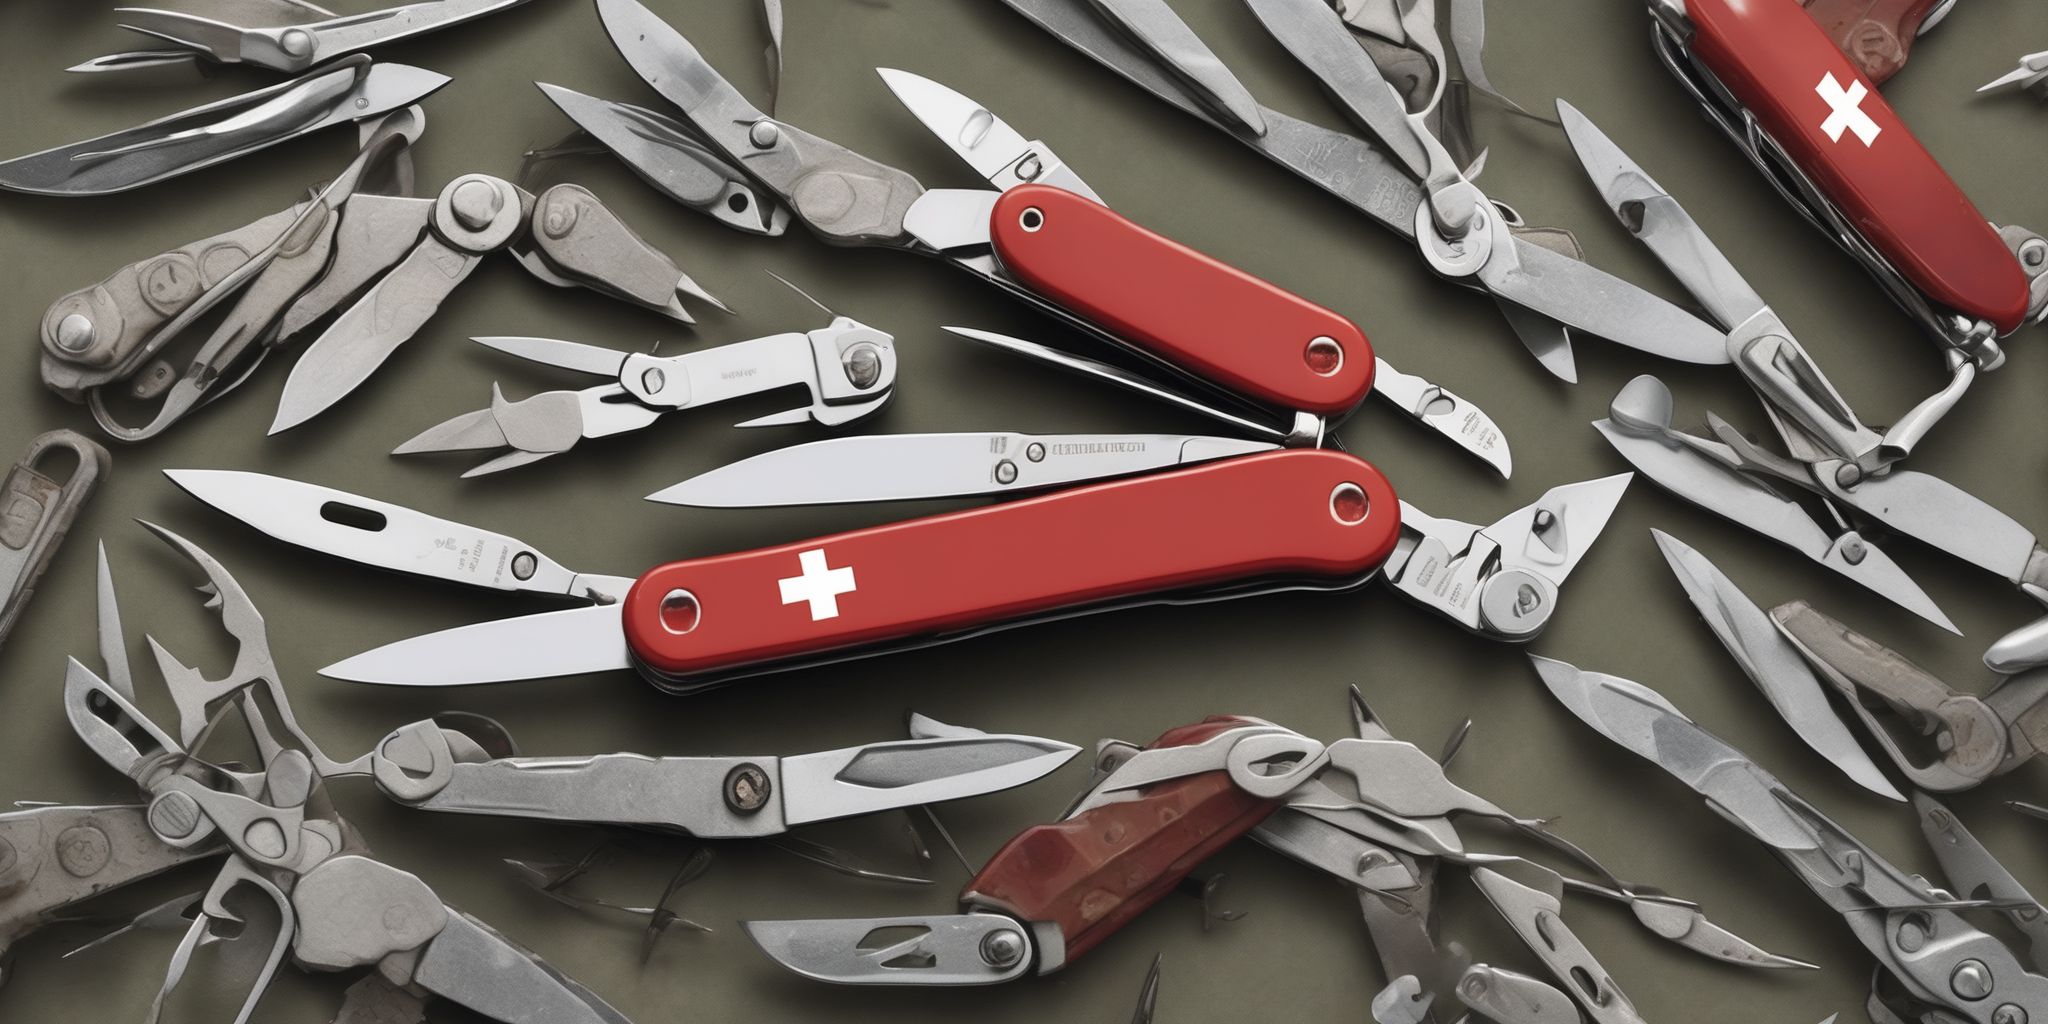 Swiss-army knife  in realistic, photographic style